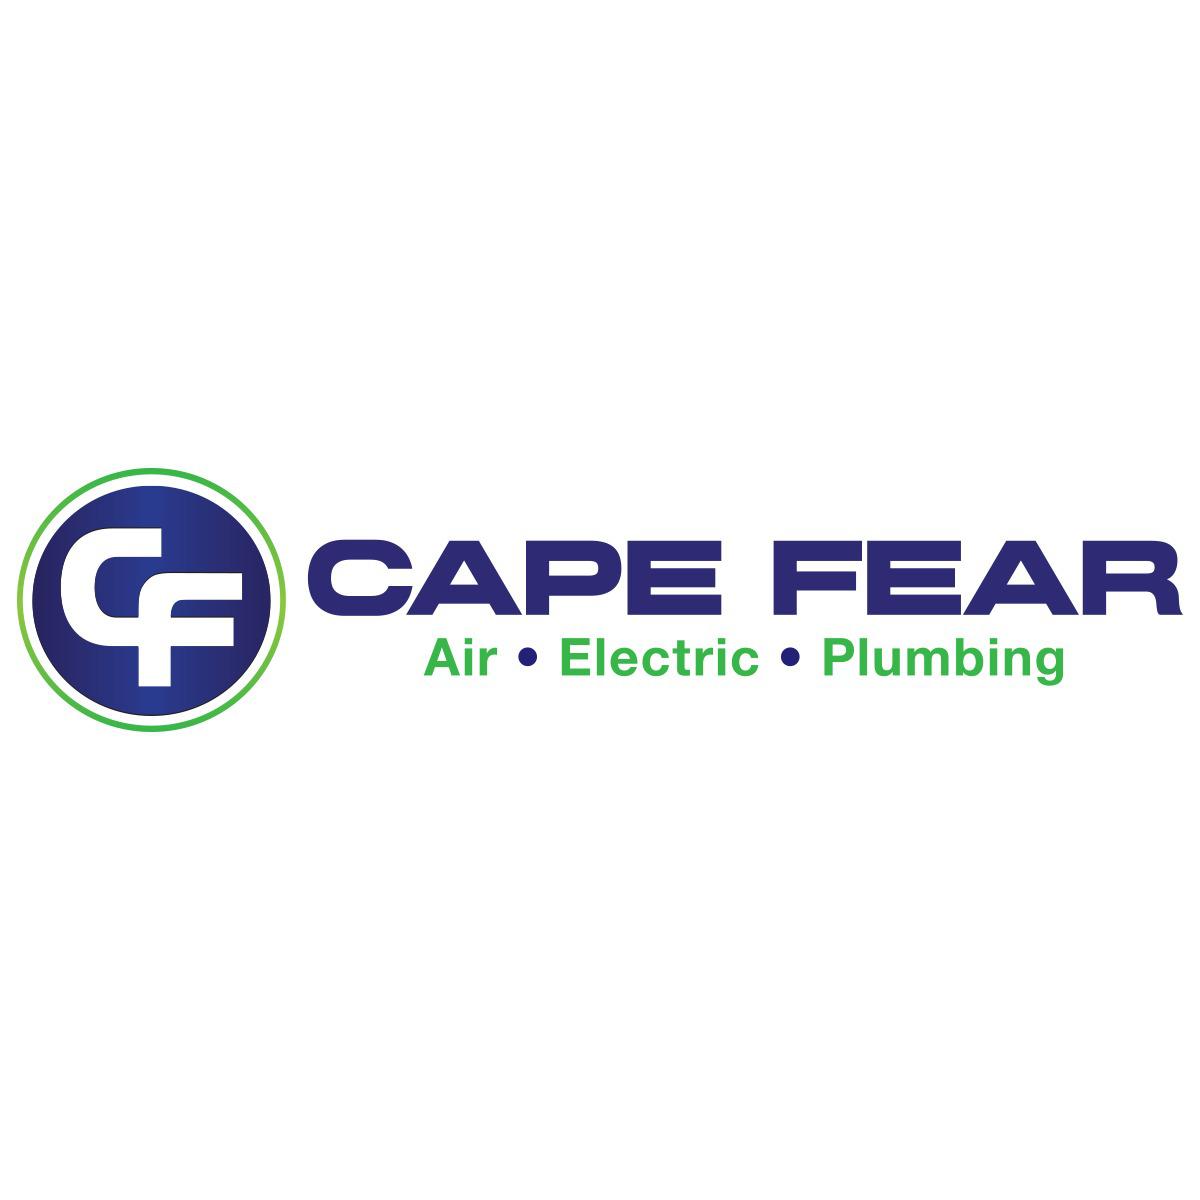 Cape Fear Air, Electrical & Plumbing - Fayetteville, NC 28305 - (910)216-9394 | ShowMeLocal.com